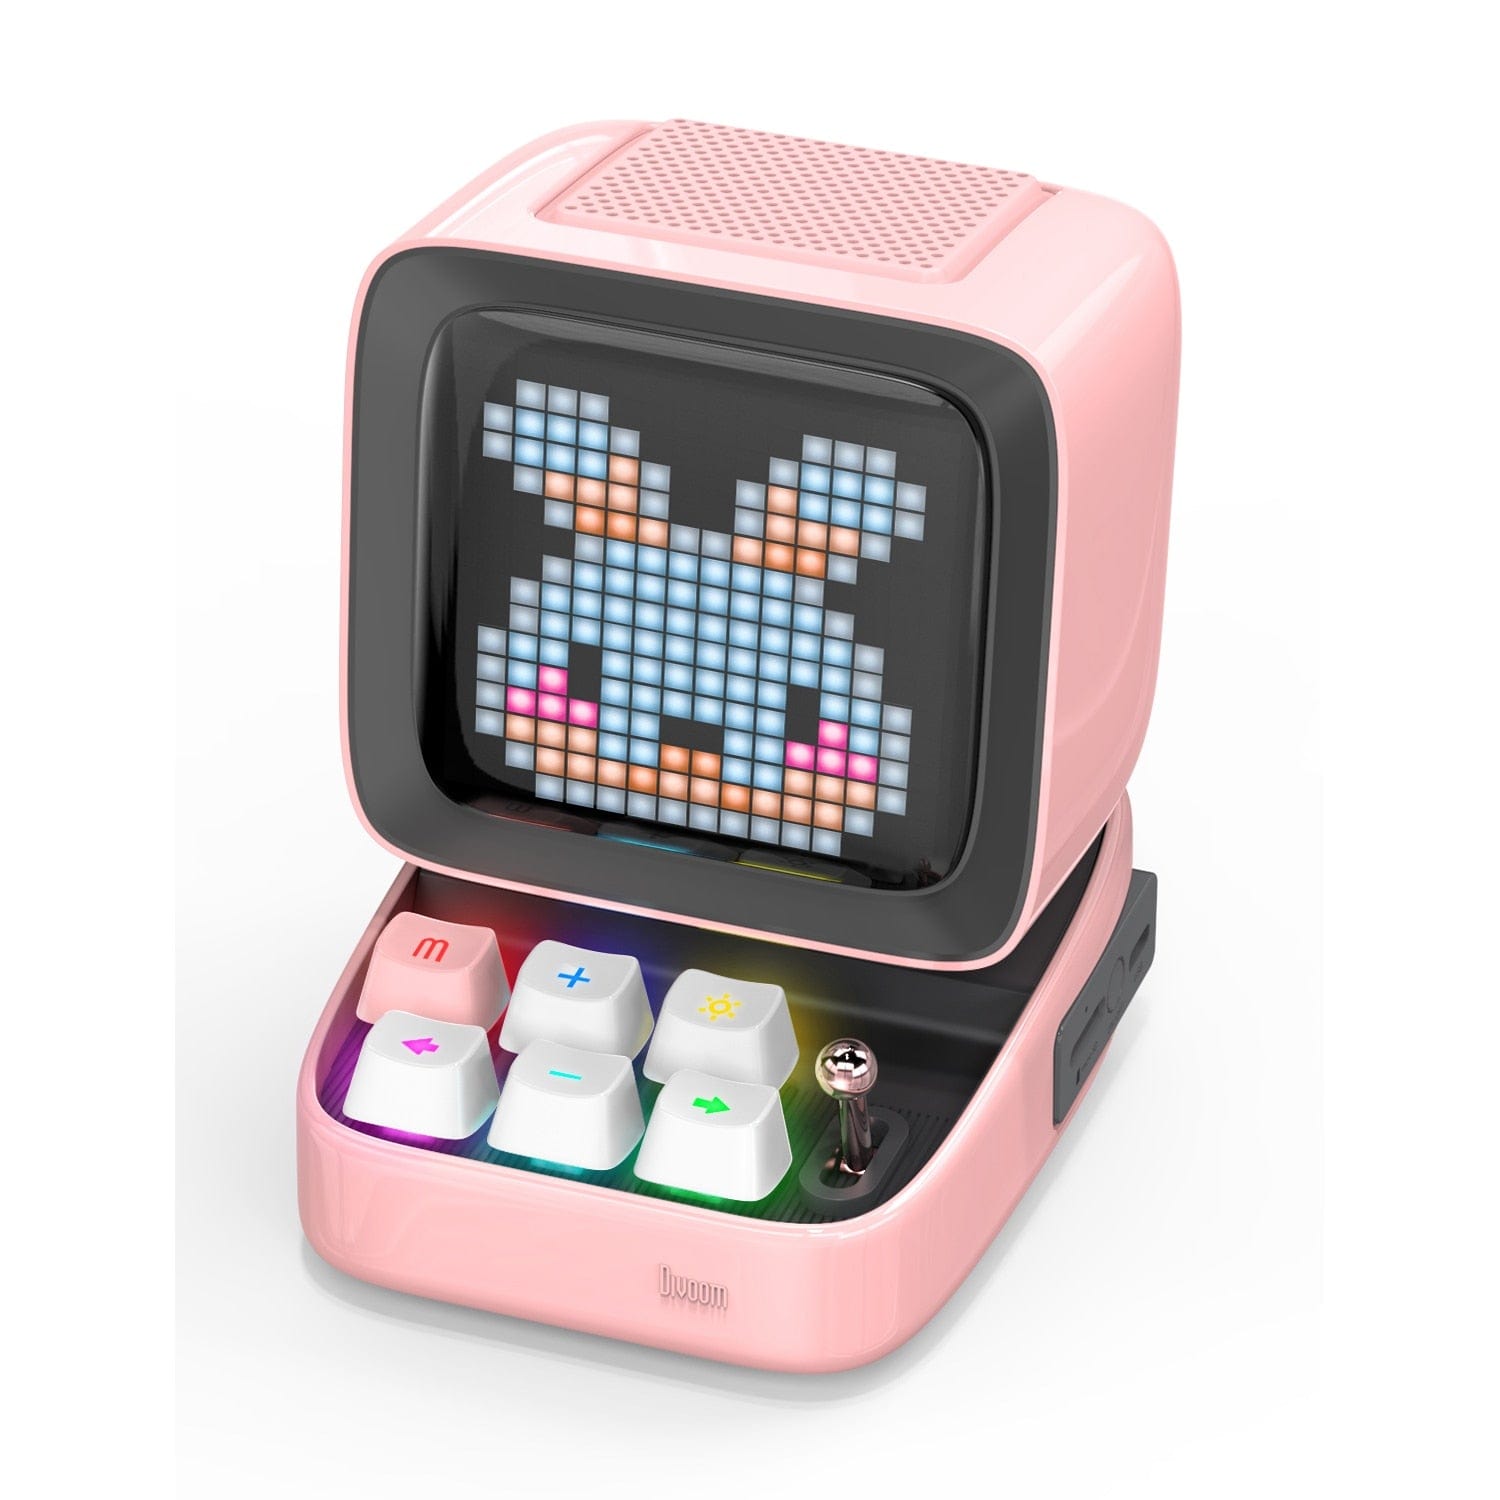 Smart Tech Shopping LED display Pink / Speaker Ditoo: Retro Pixel Art Bluetooth Speaker with DIY LED Display - Gift and Home Decor